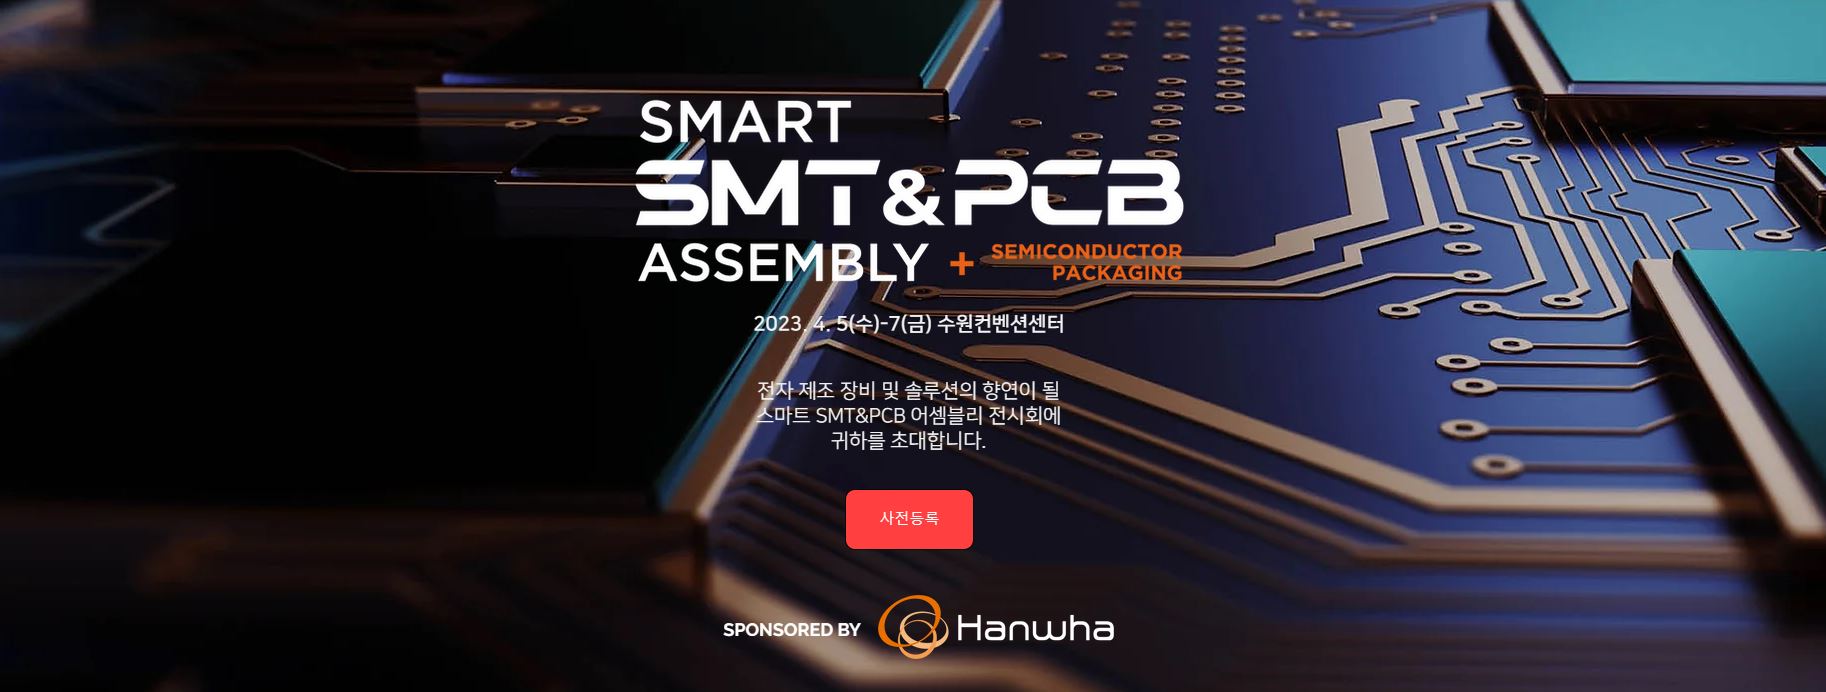 5th ~ 7th April, 2023 participate in the SMART SMT & PCB ASSEMBLY exhibition